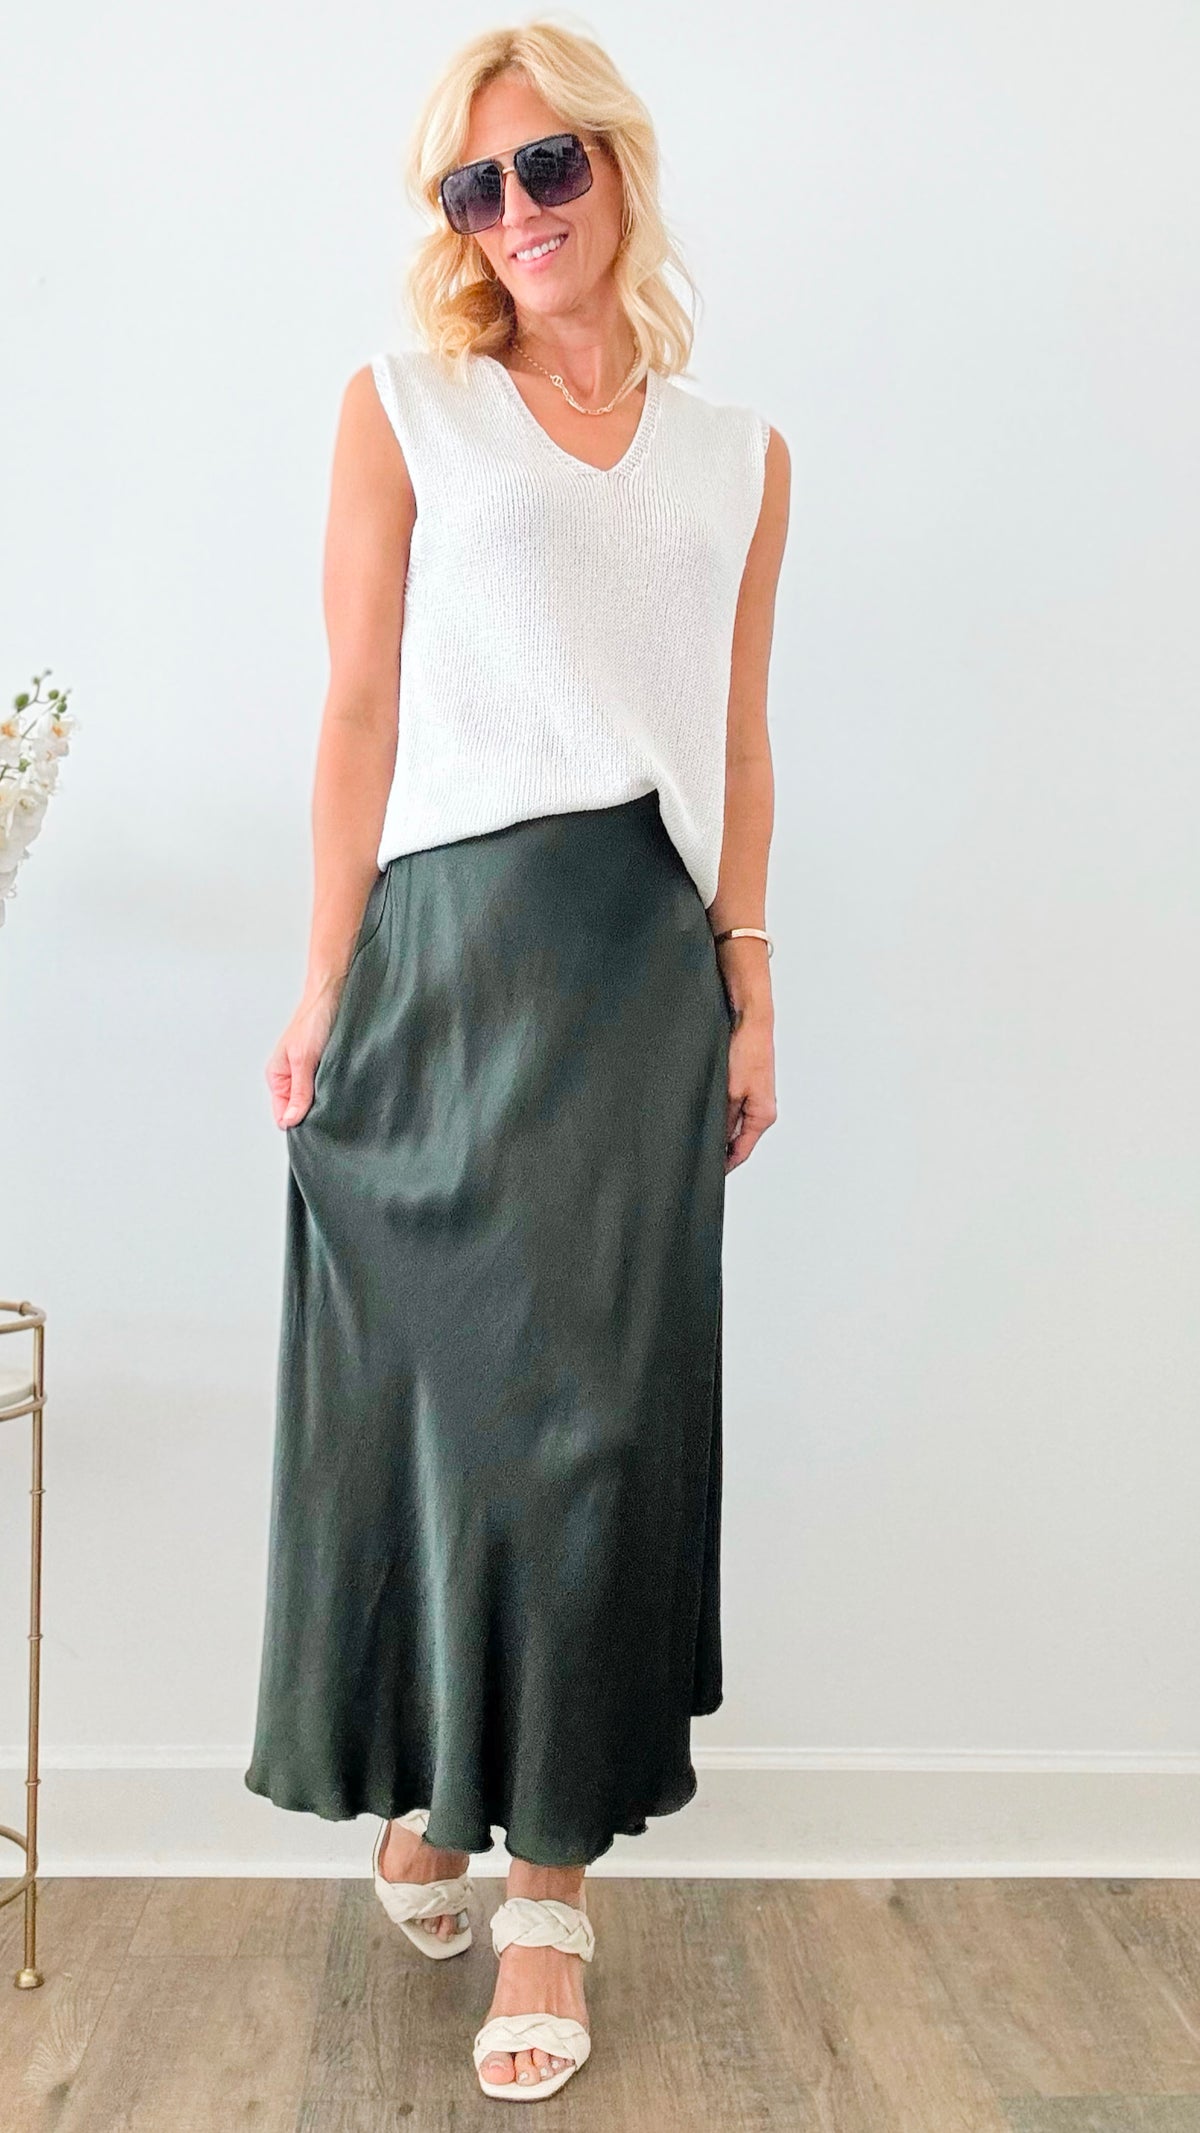 Brooklyn Italian Satin Midi Skirt - Army Green-170 Bottoms-Italianissimo-Coastal Bloom Boutique, find the trendiest versions of the popular styles and looks Located in Indialantic, FL